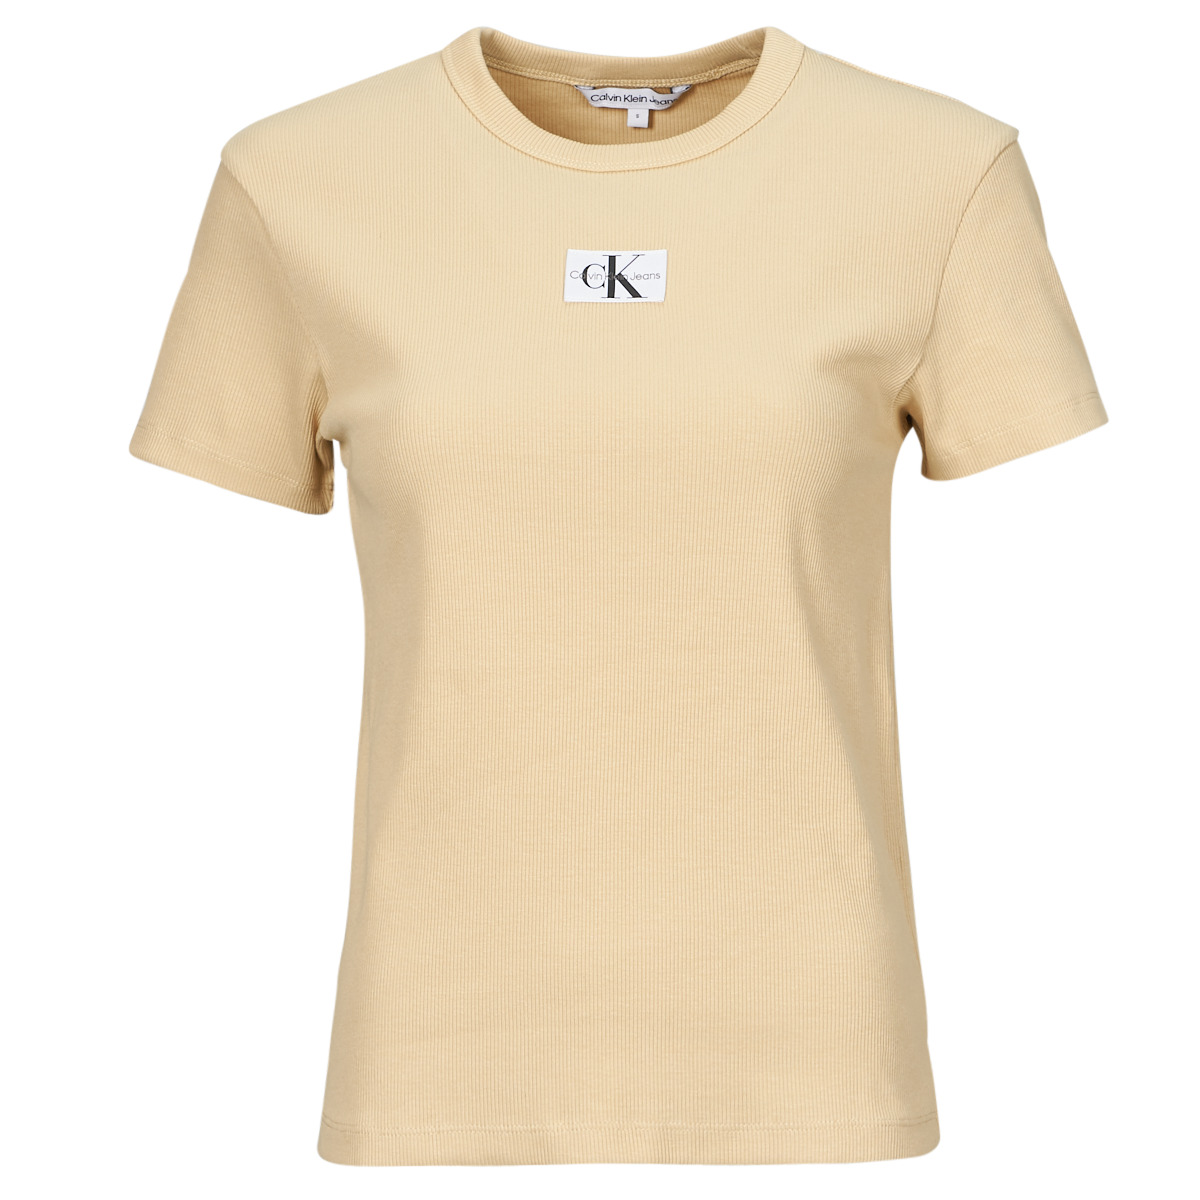 short-sleeved RIB Klein delivery Jeans Beige Calvin - Europe 44,00 REGULAR t-shirts - Spartoo Women ! TEE WOVEN € LABEL Fast | Clothing